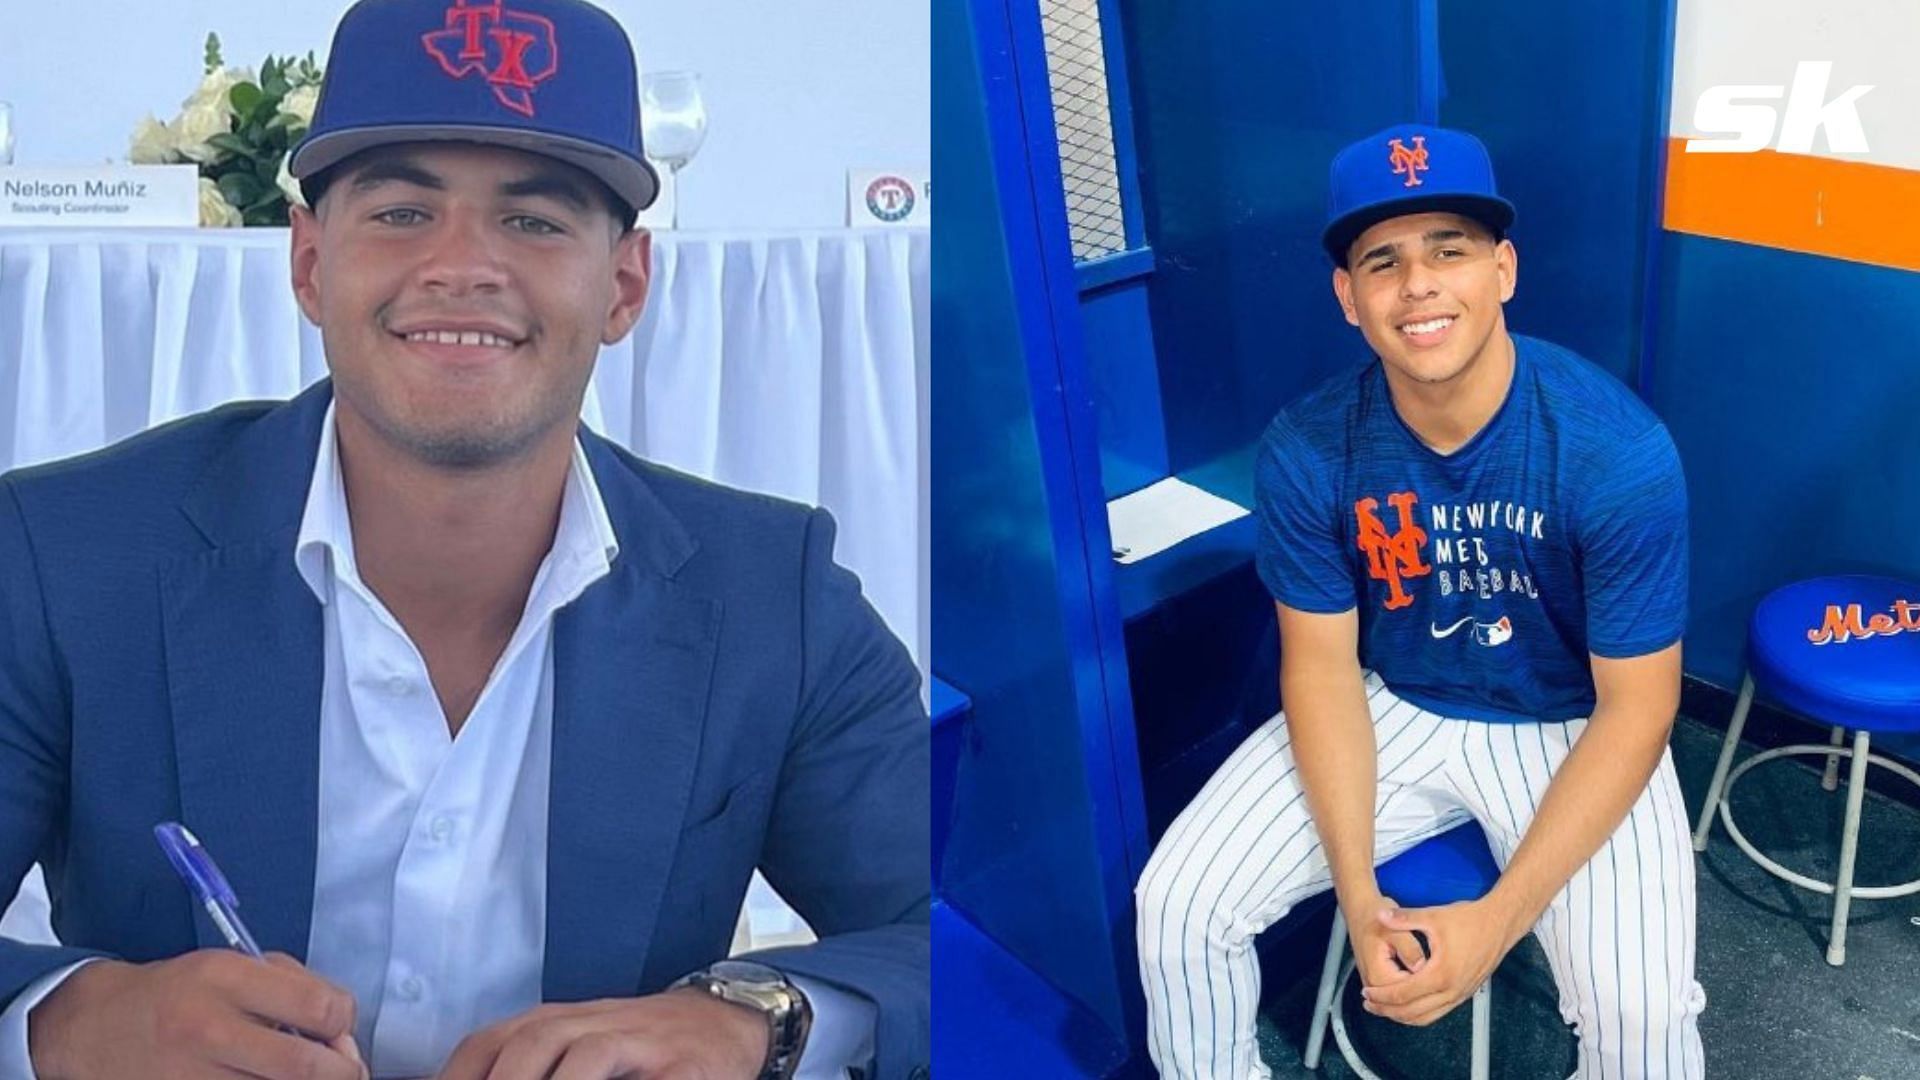 Yovanny Rodriguez and Paulino Santana are two of the top prospects signed during international free agency